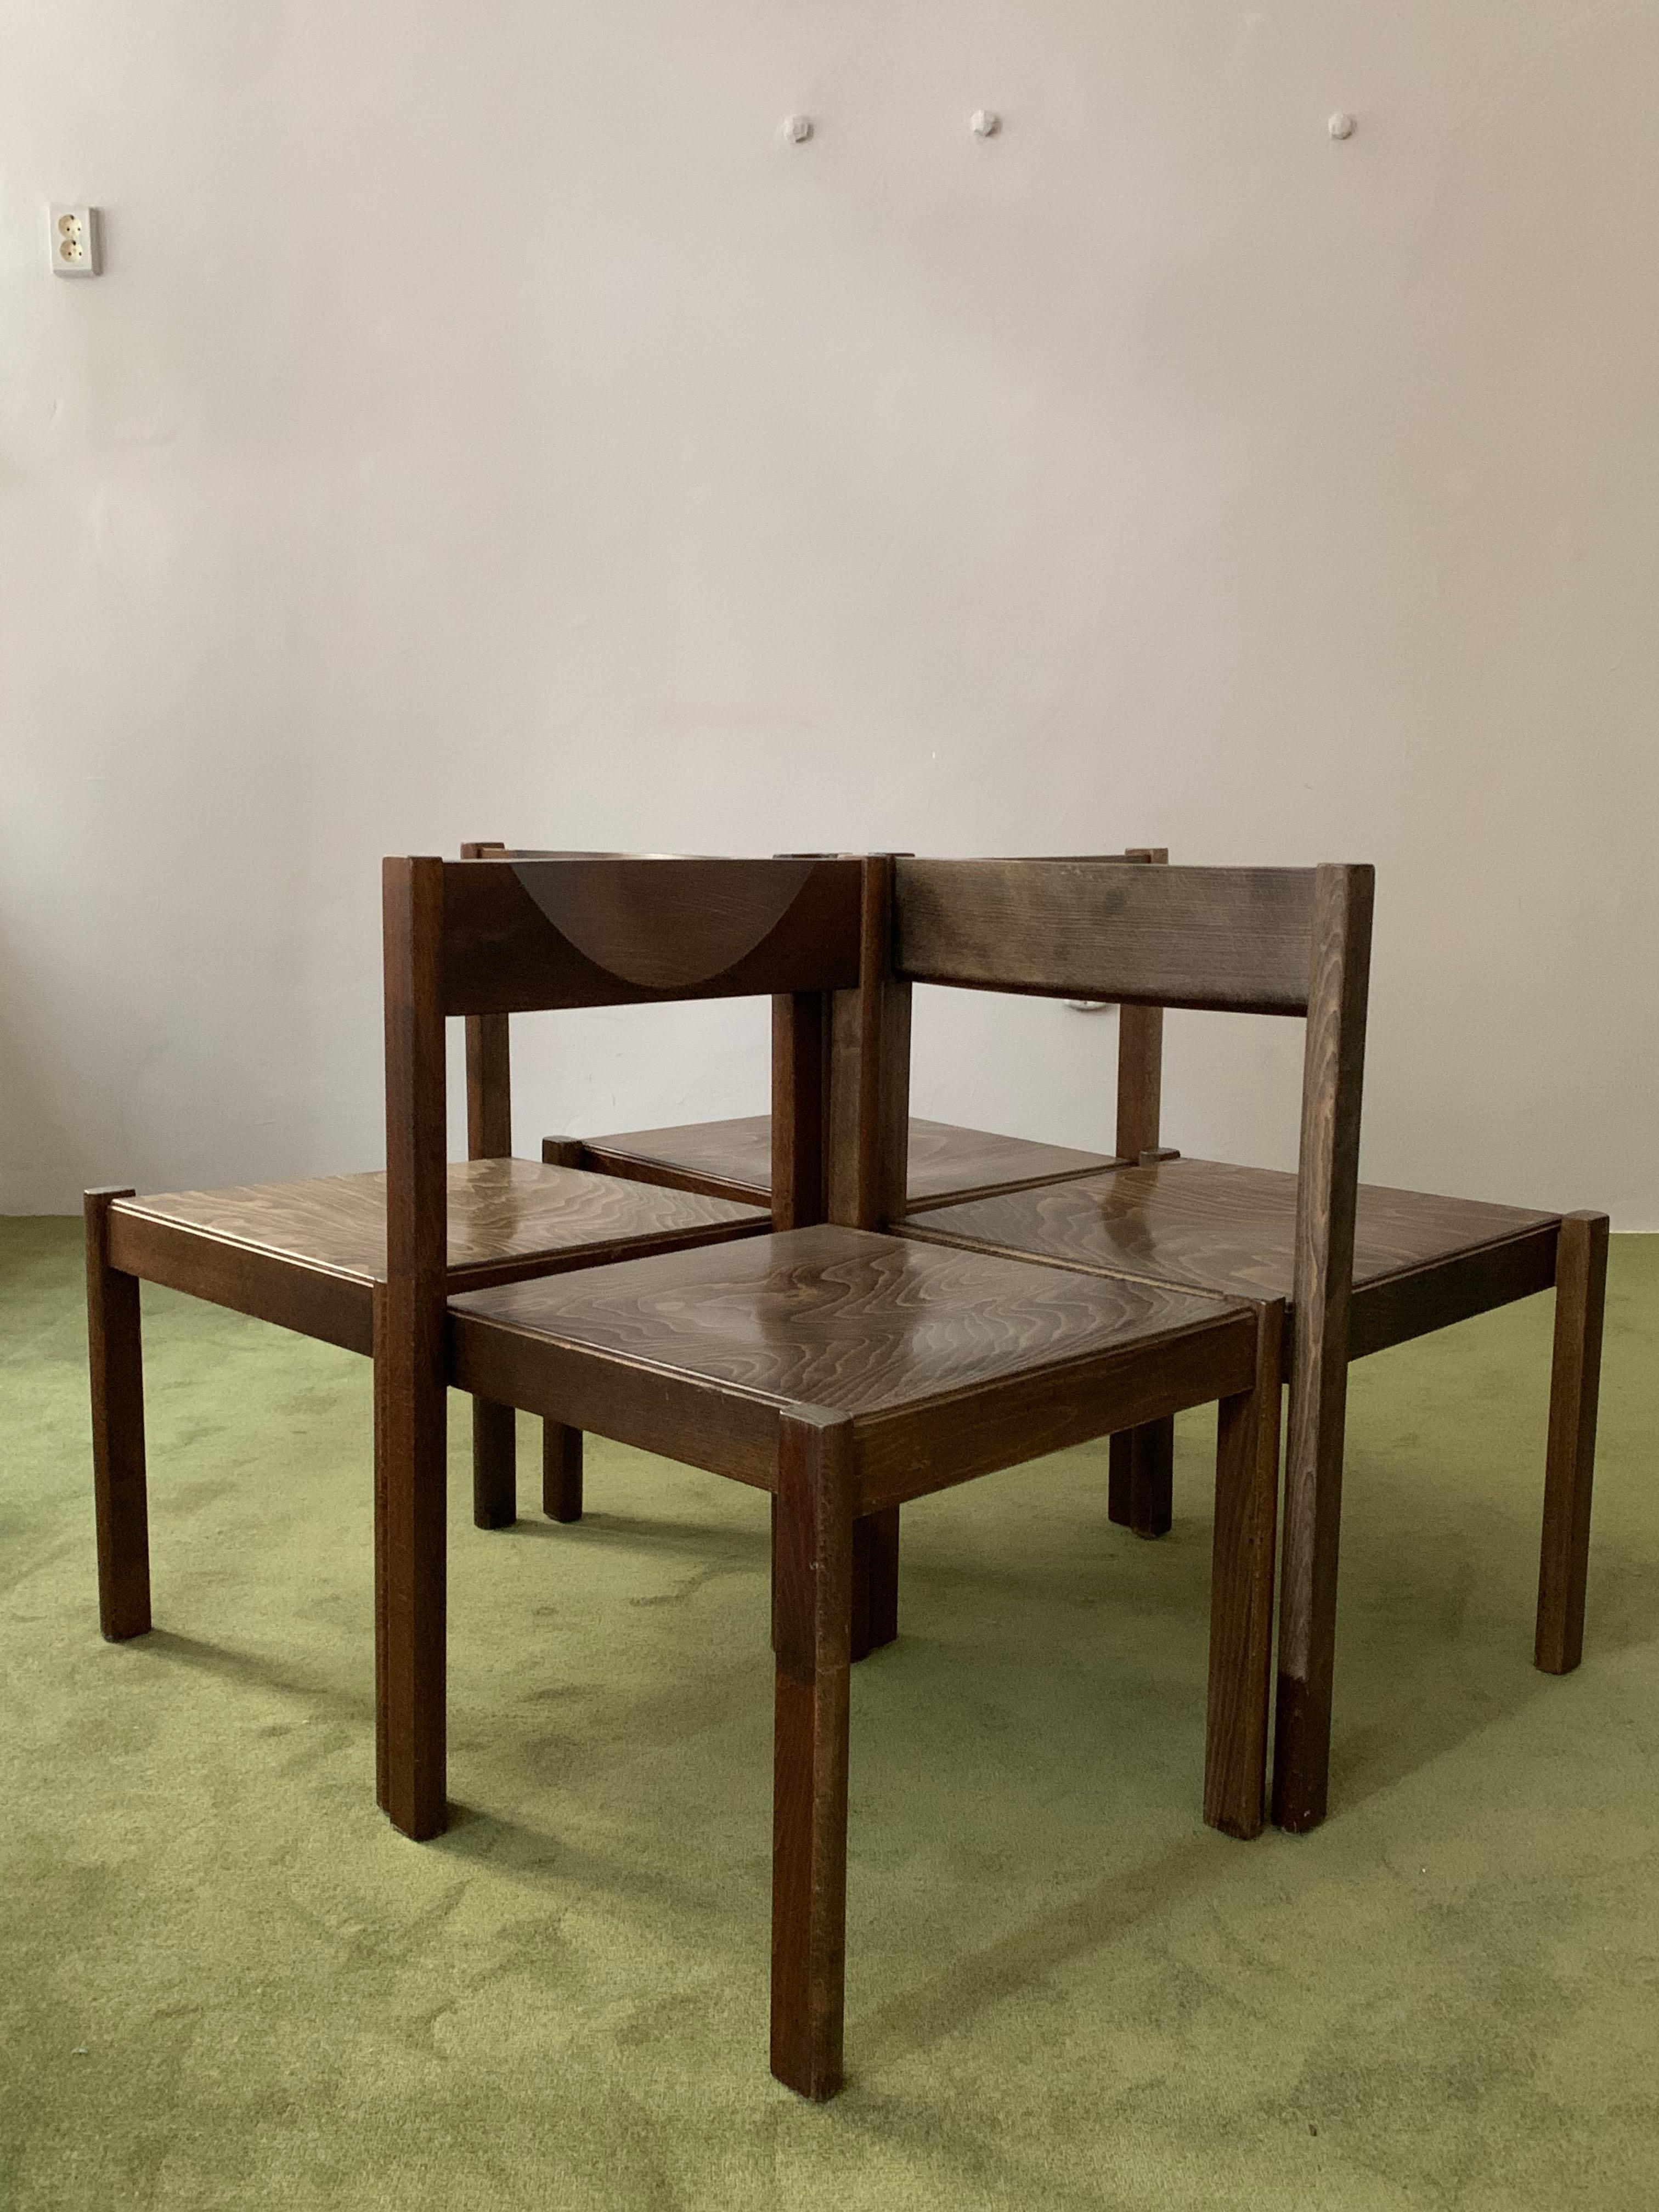  Set of 4 Santo Chairs by Edlef Bandixen for Dietiker Switzerland 1969  For Sale 7